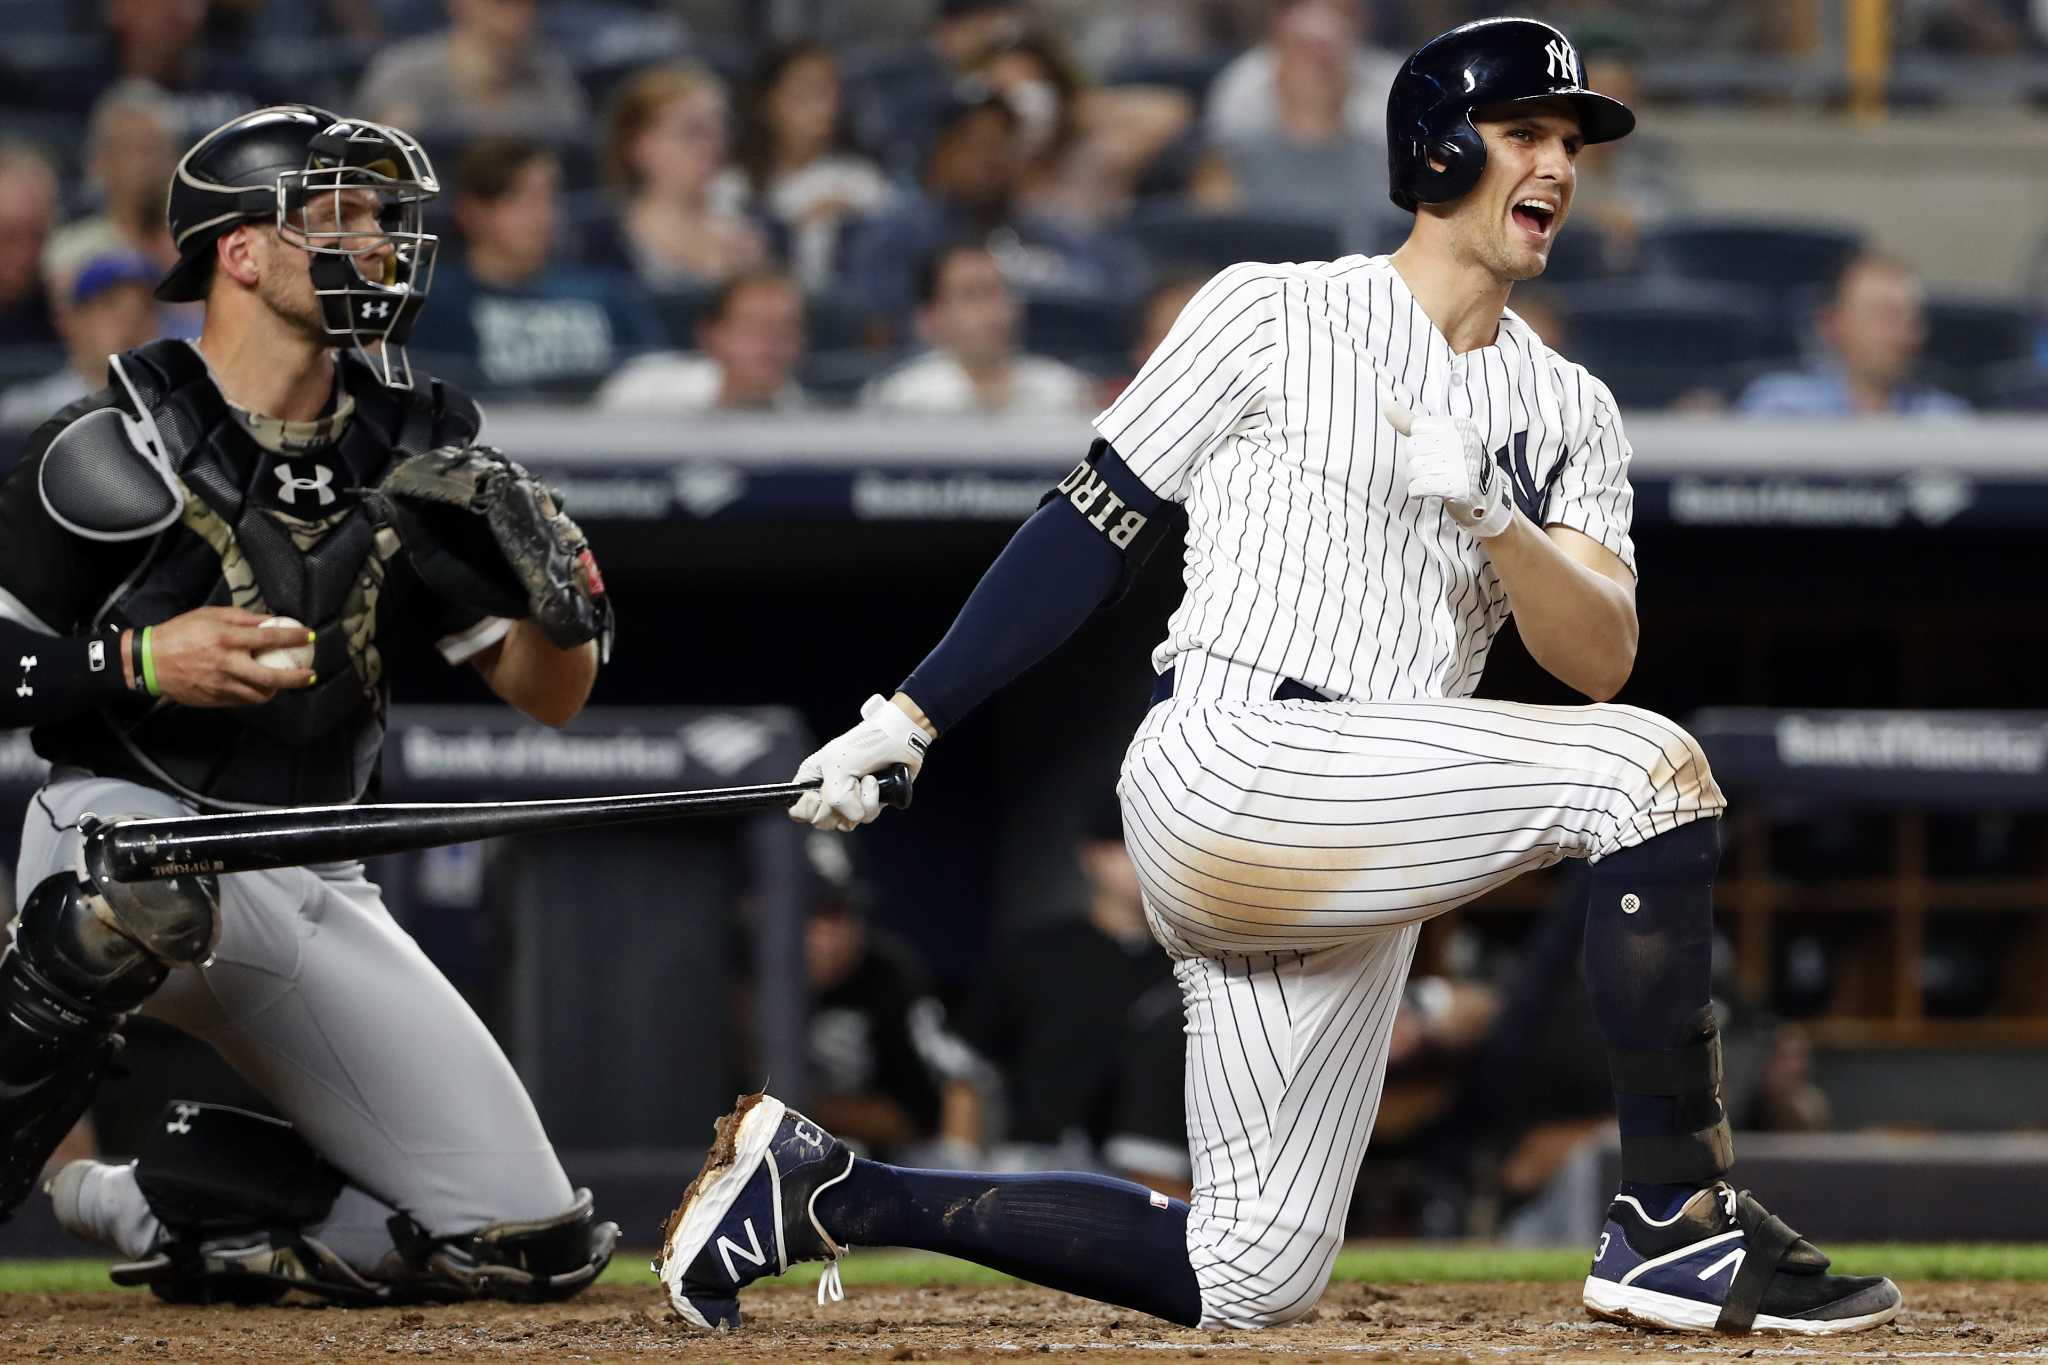 The Ups And Downs Of Being Yankees' First Baseman Greg Bird